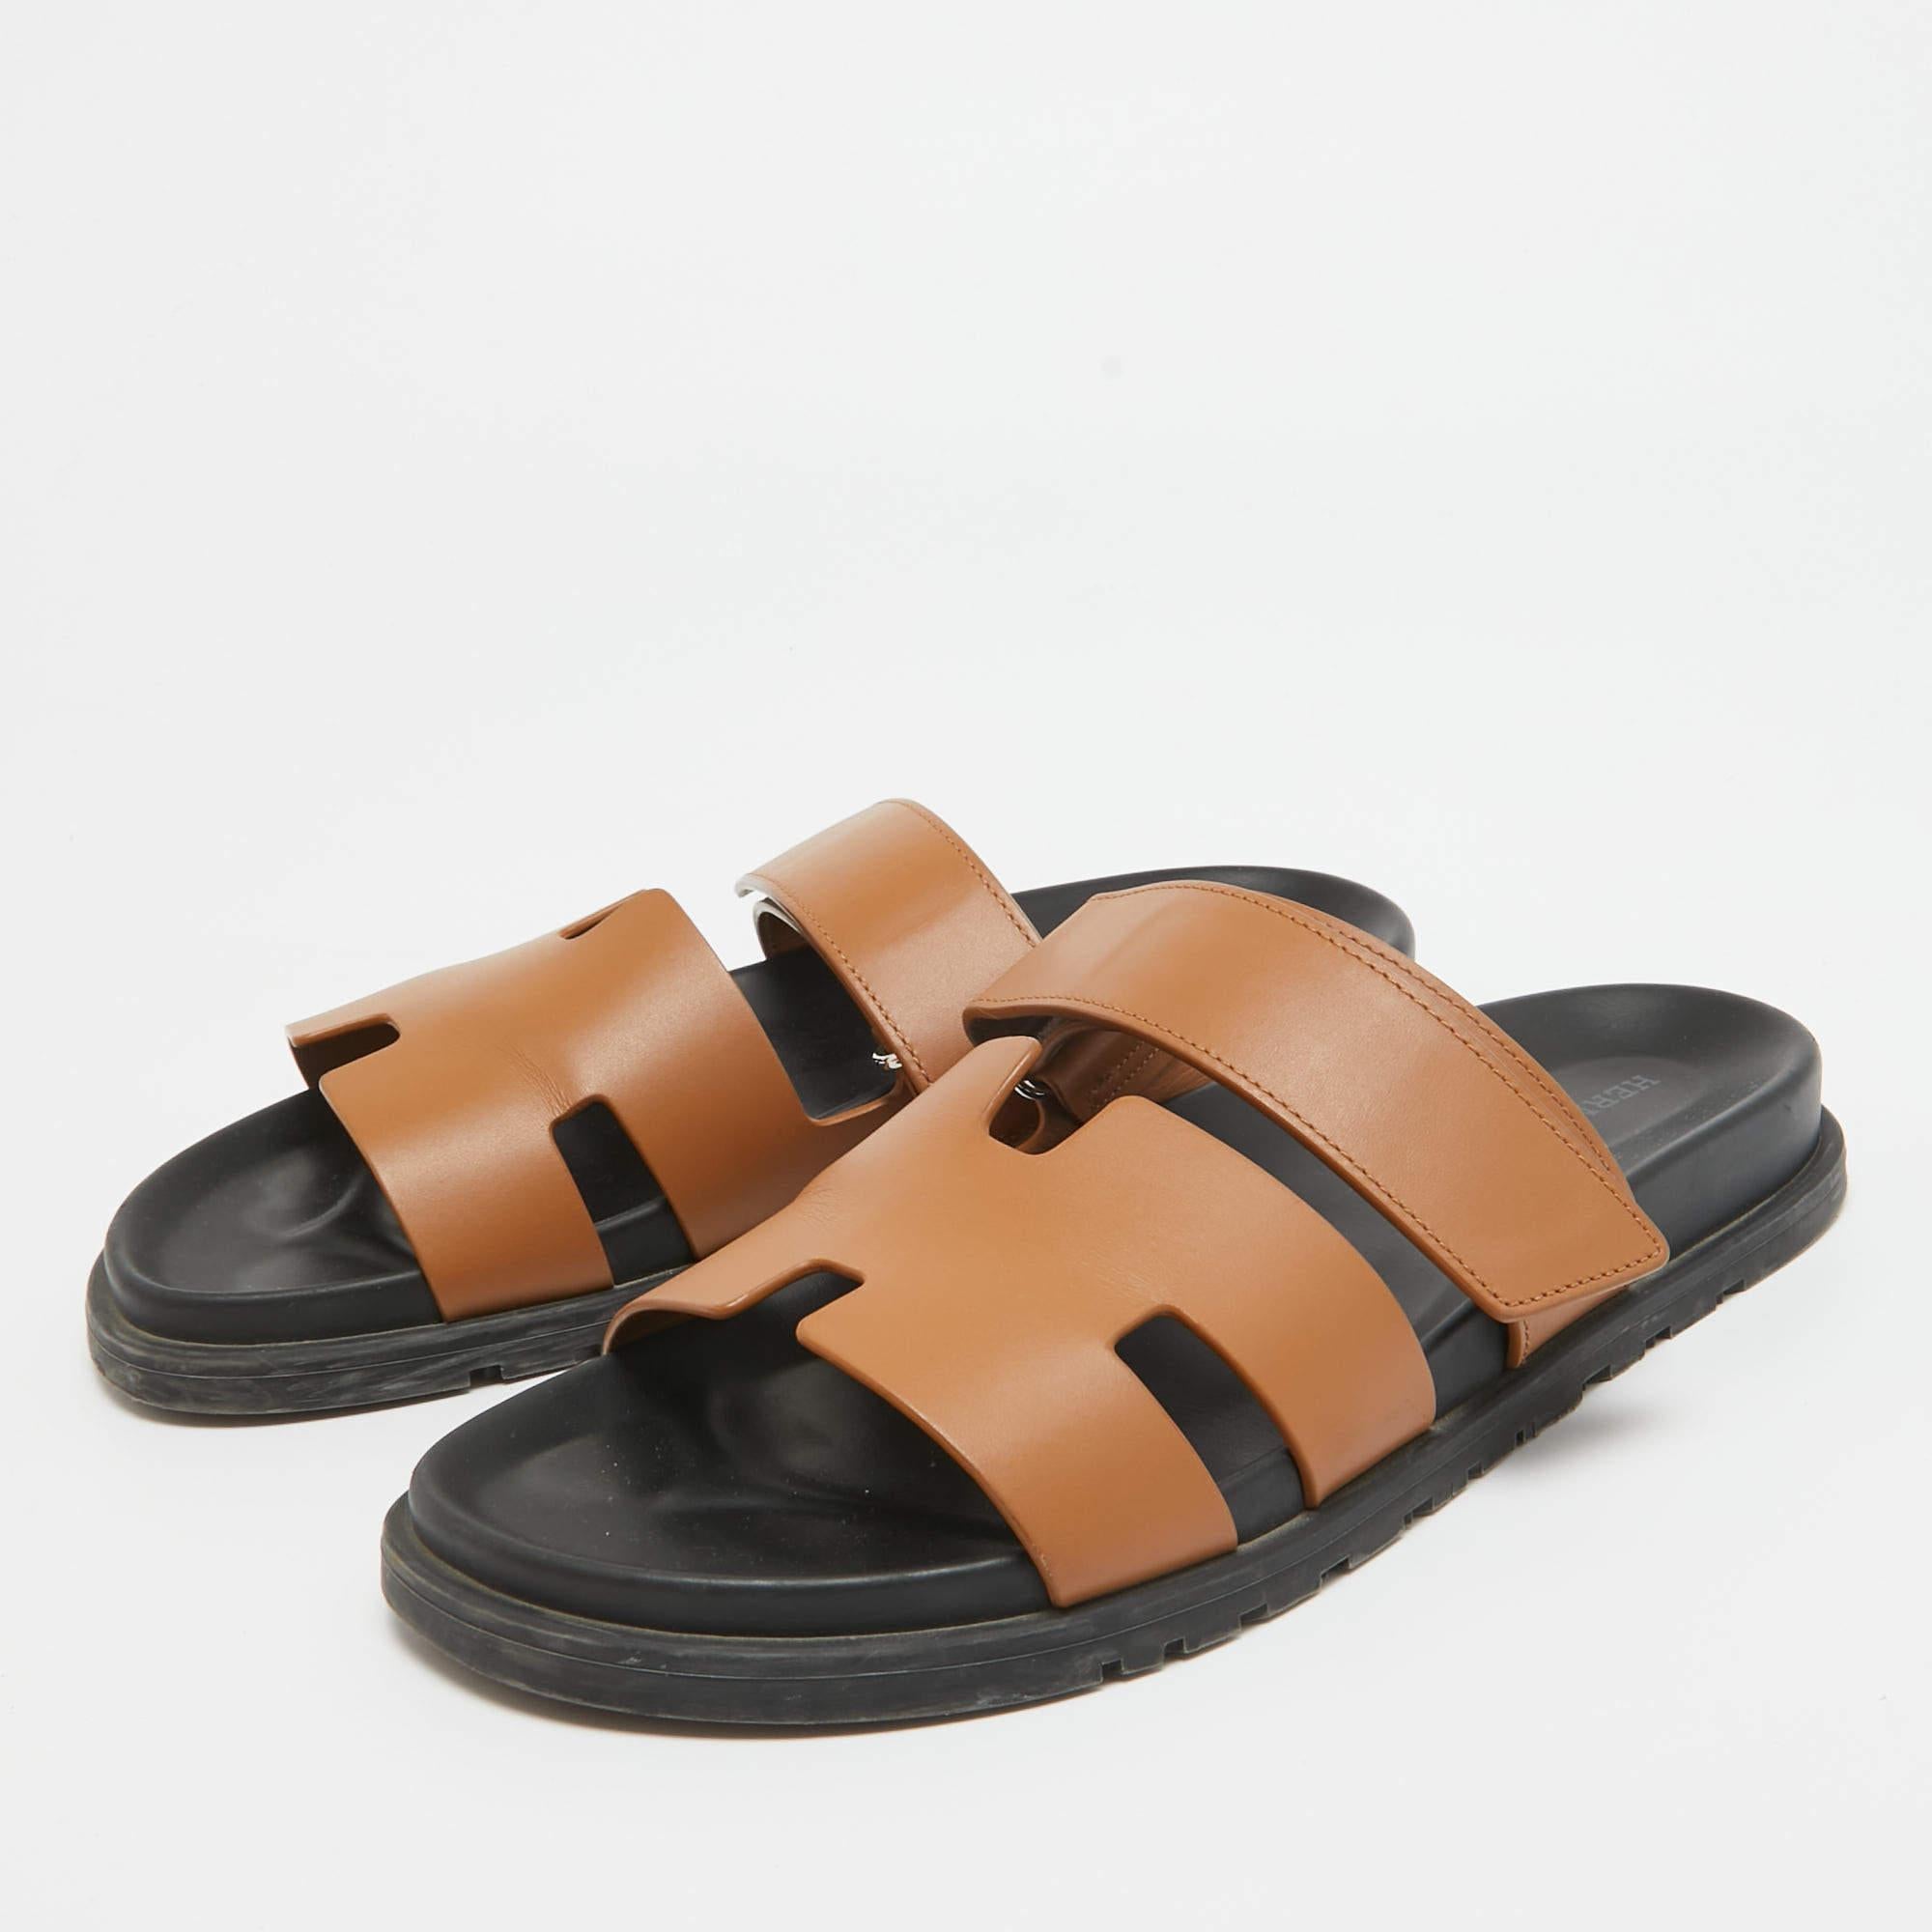 Hermes Brown Leather Chypre Sandals Size 41 2